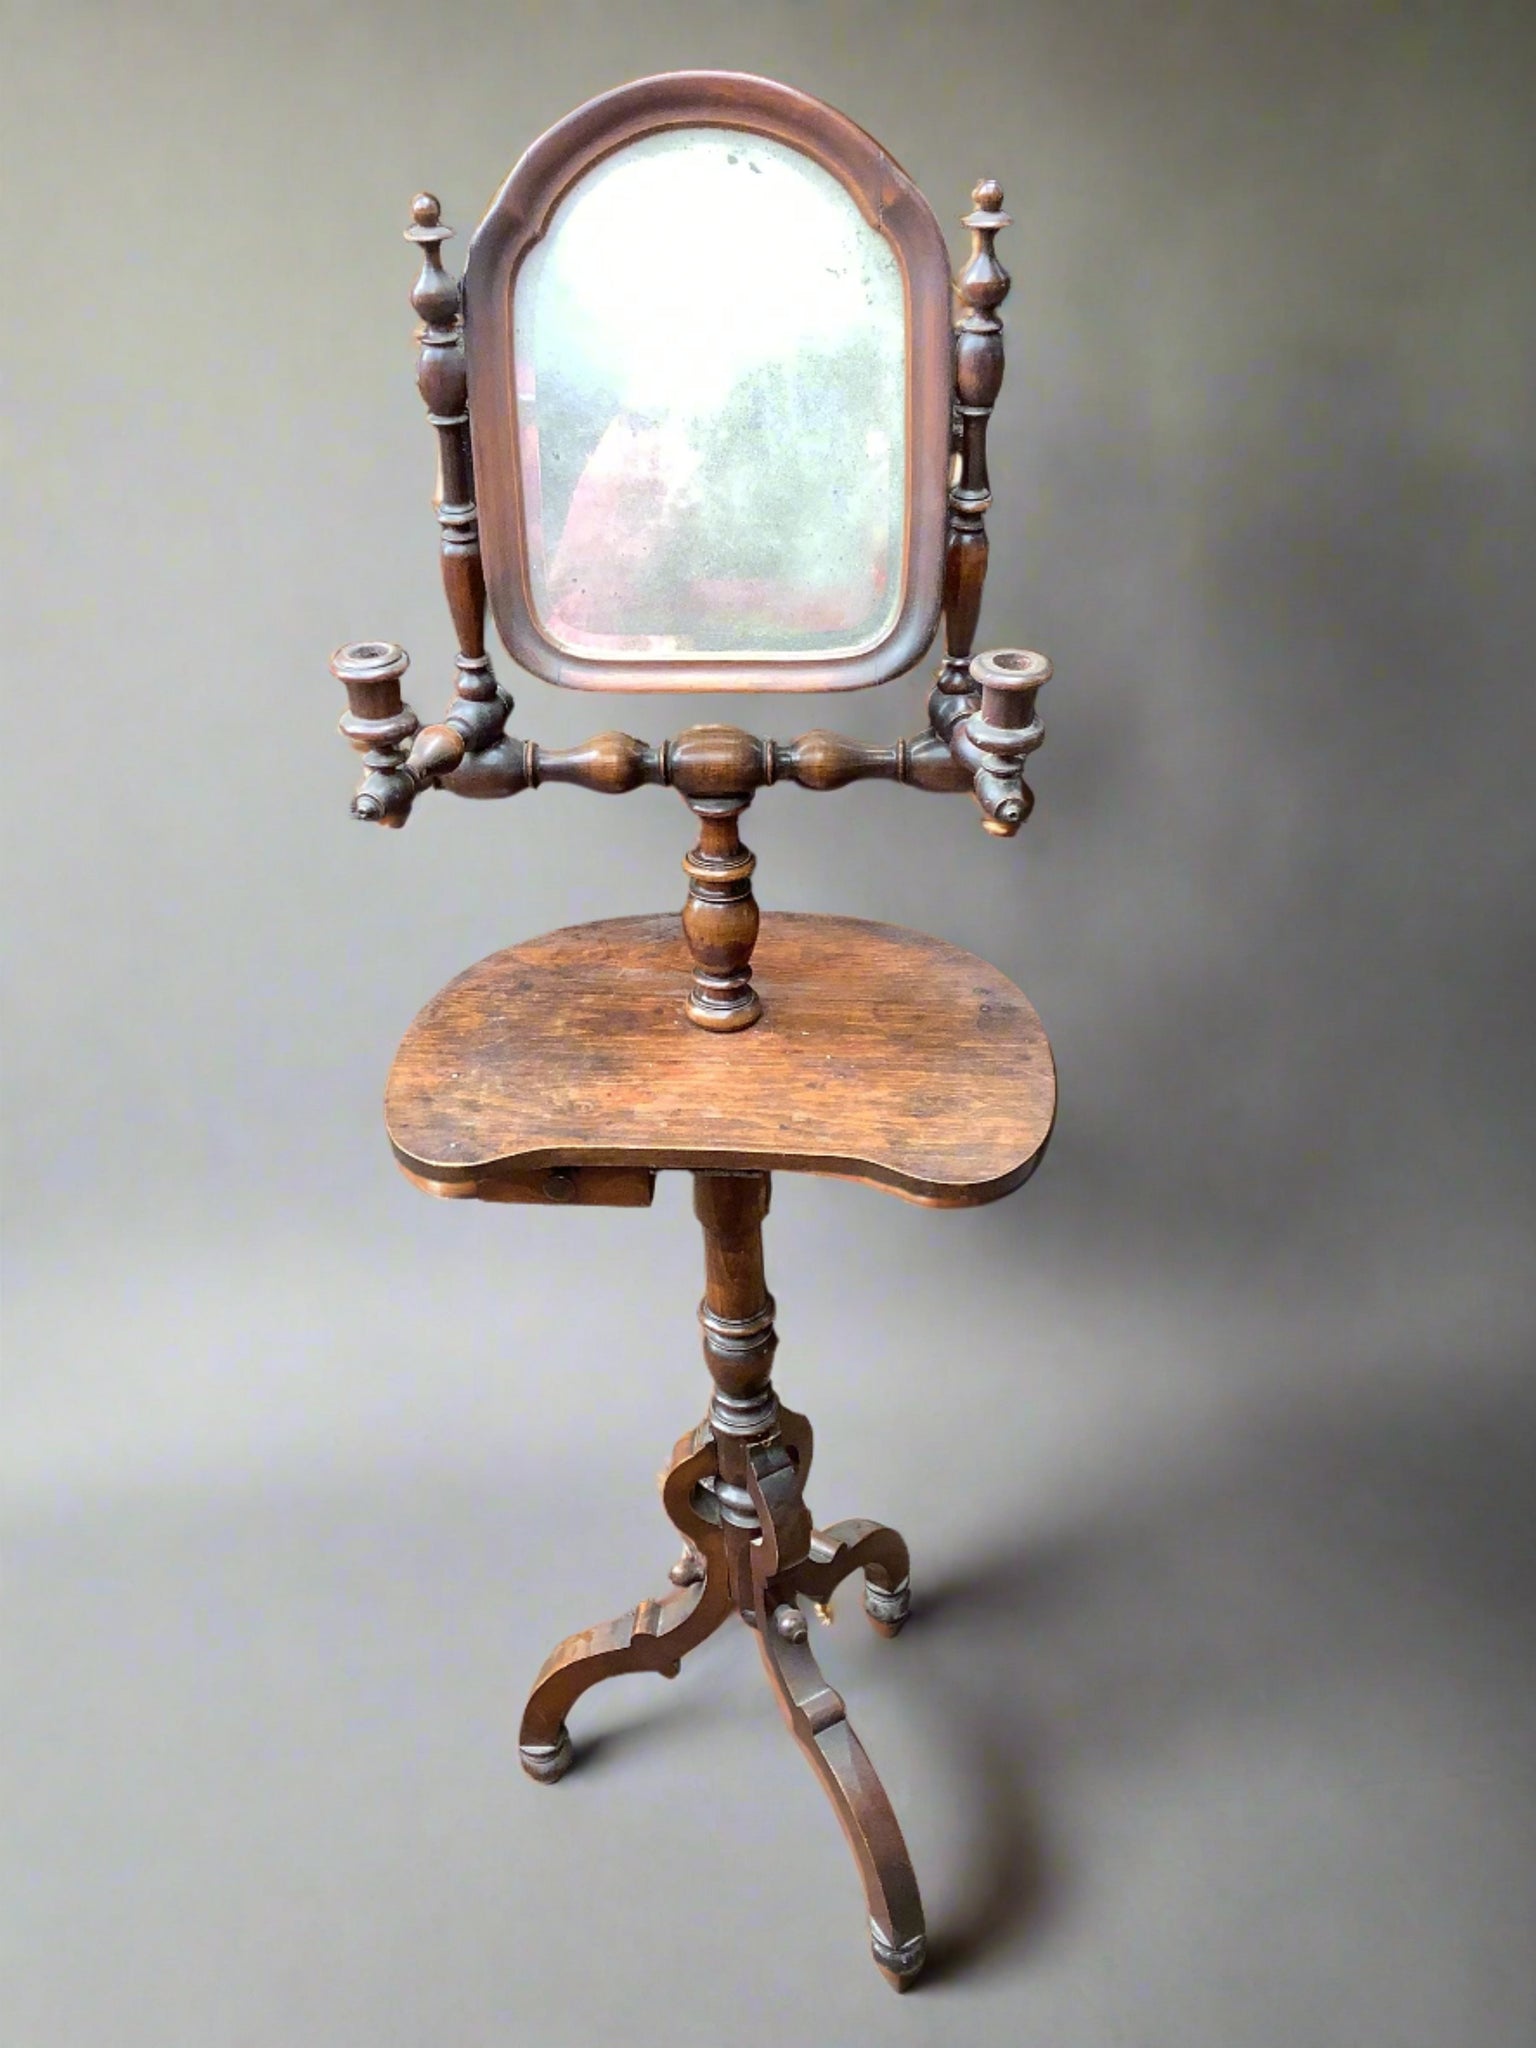 Antique wooden vanity table with two candle holders, a tiny drawer, and a mirror.